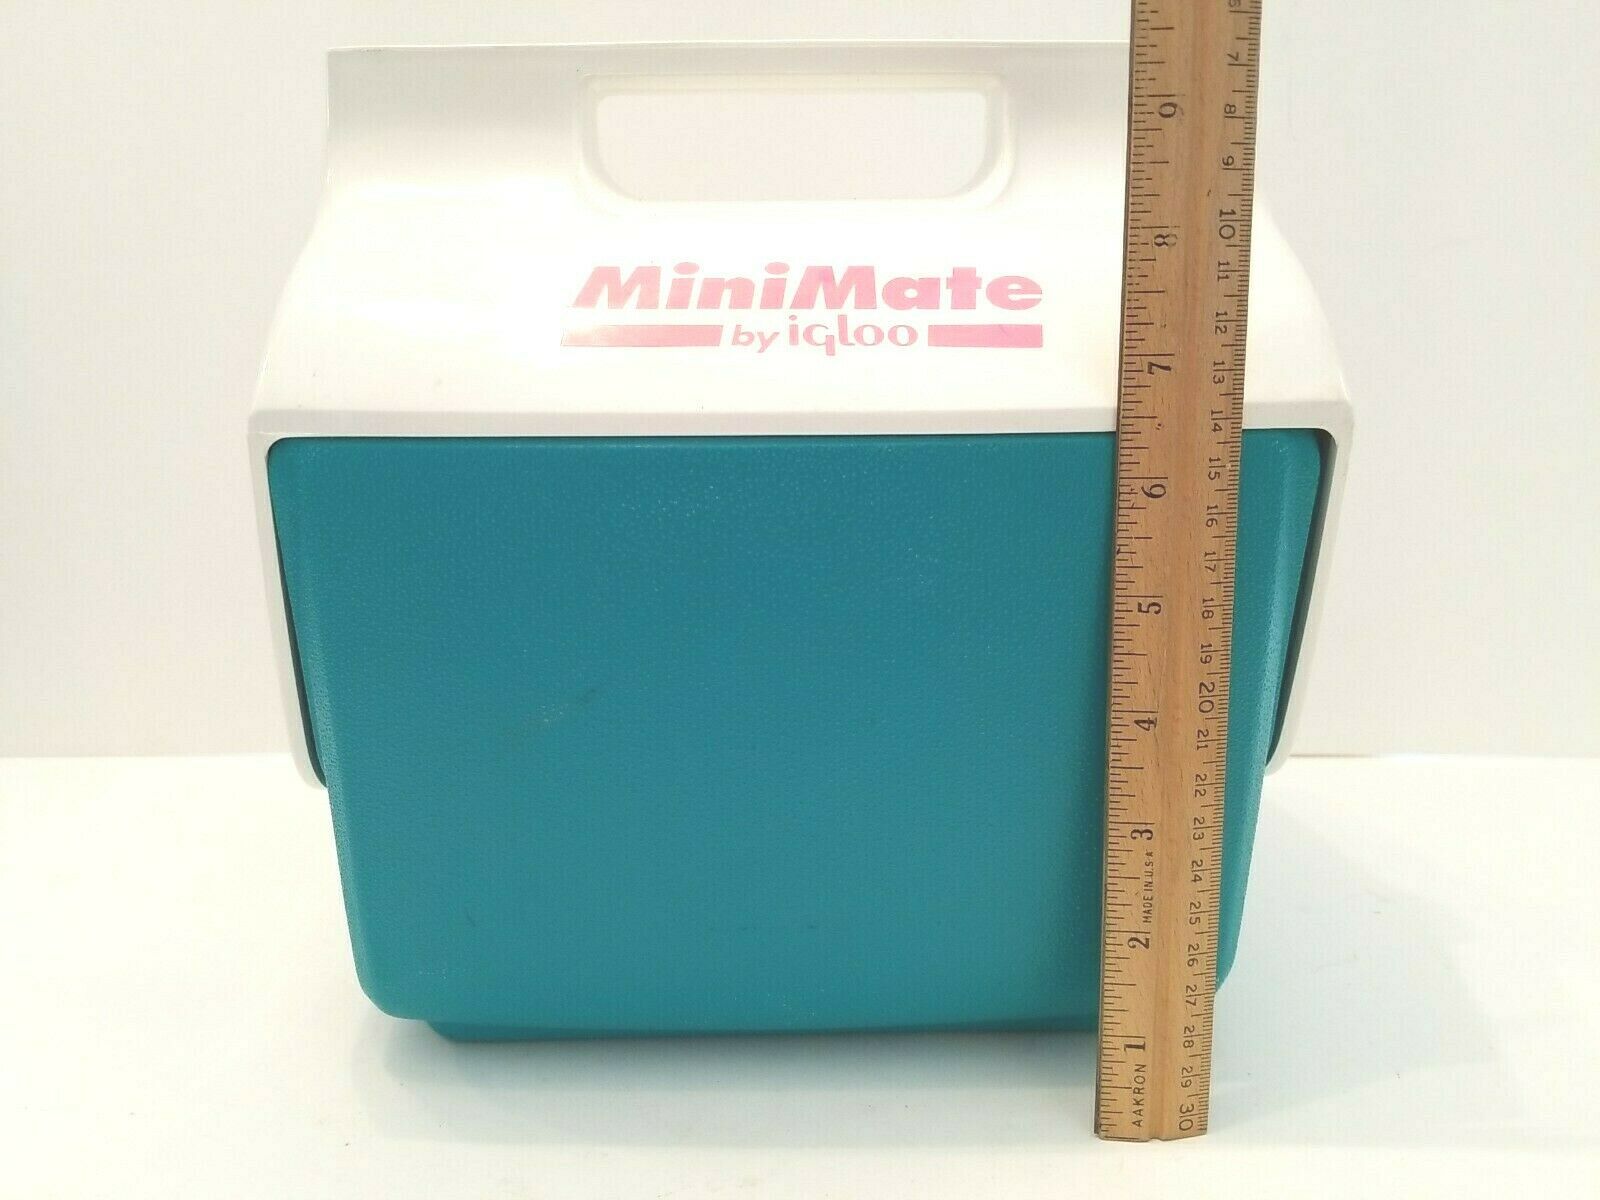 Vintage FUN Mini Mate Personal Cooler Lunch Box Igloo Red White